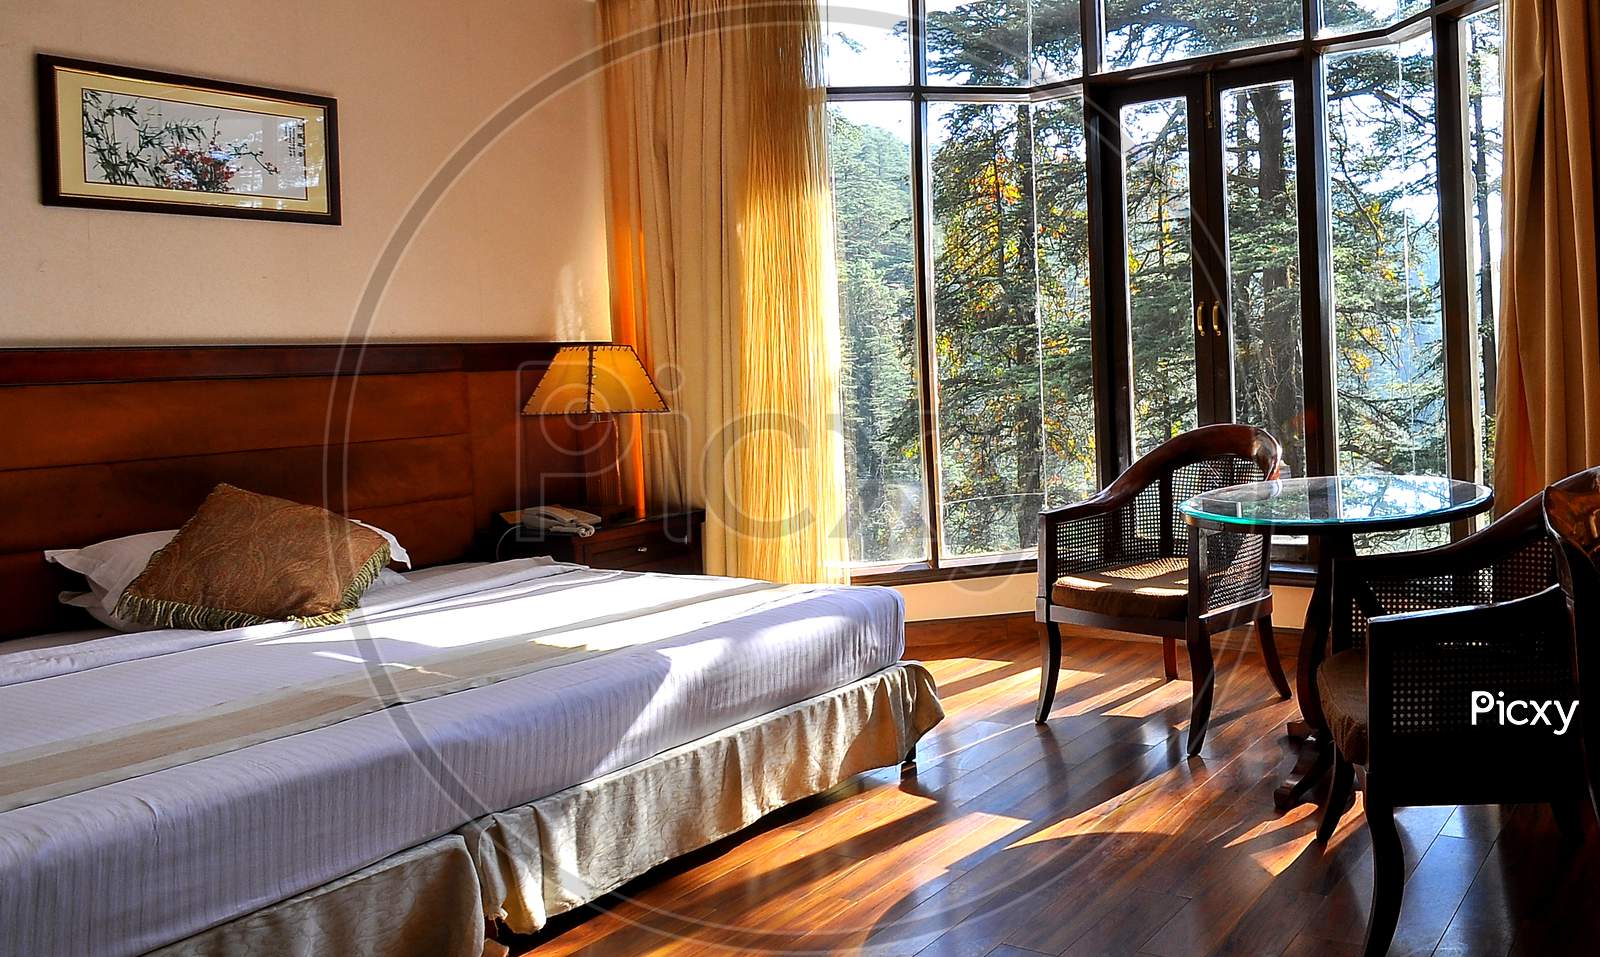 Beautiful Interior of a bedroom with landscape view of sunrise natural light Kerala